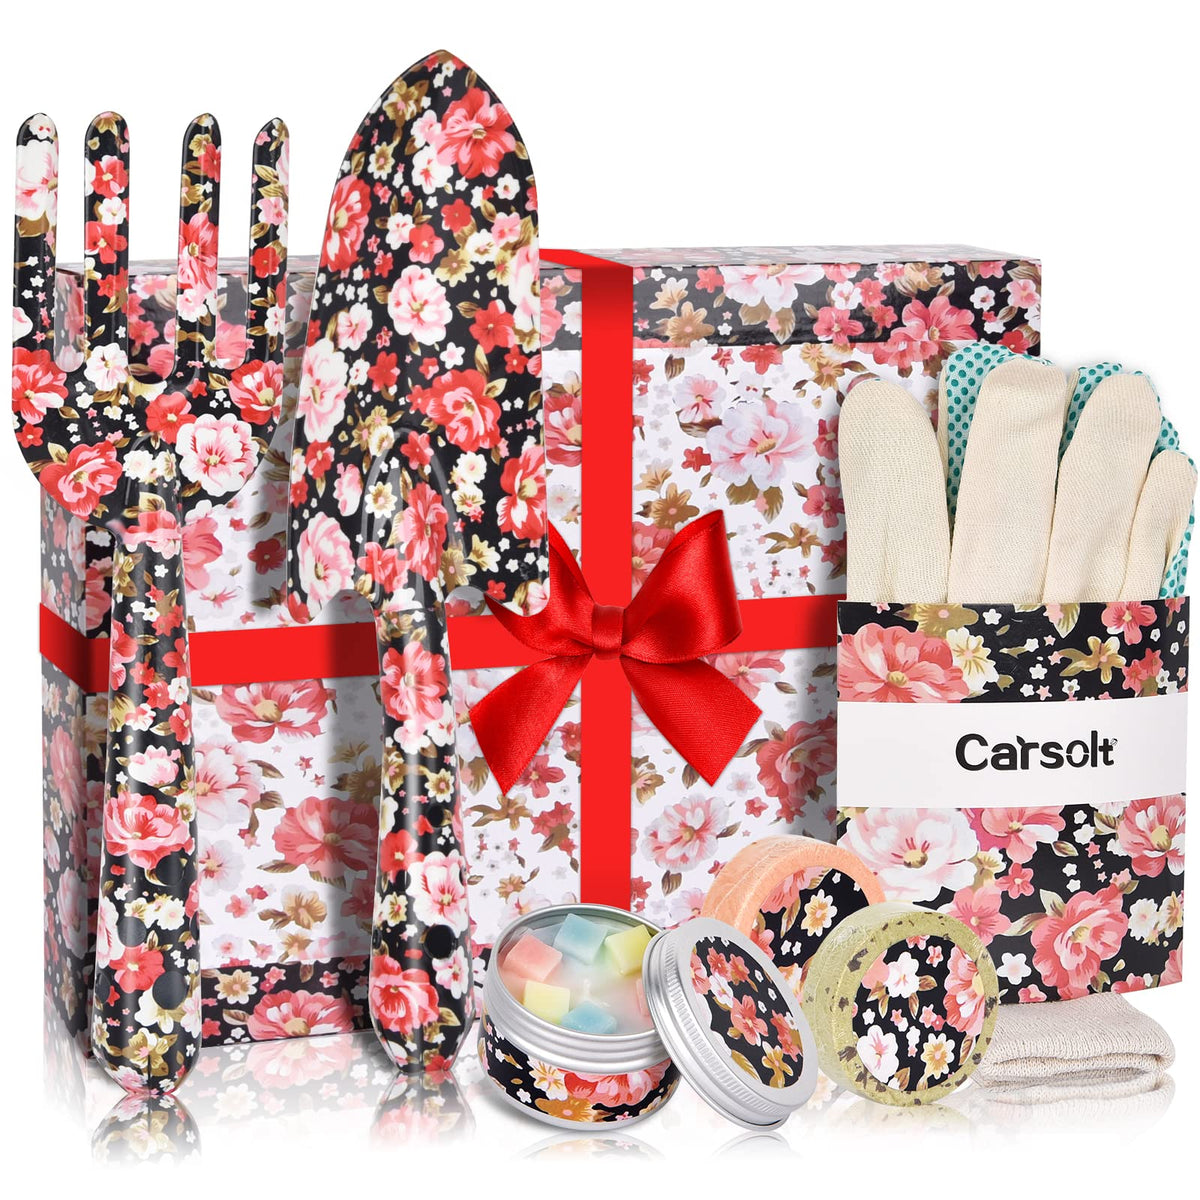 Carsolt Gardening Gifts for Women, Gifts For Mum with Garden Tools Set, Gardening Gloves, 1 Tin Scented Candle and 2 Aromatherapy Shower Steamers, Gift Sets for Her at Birthday Christmas